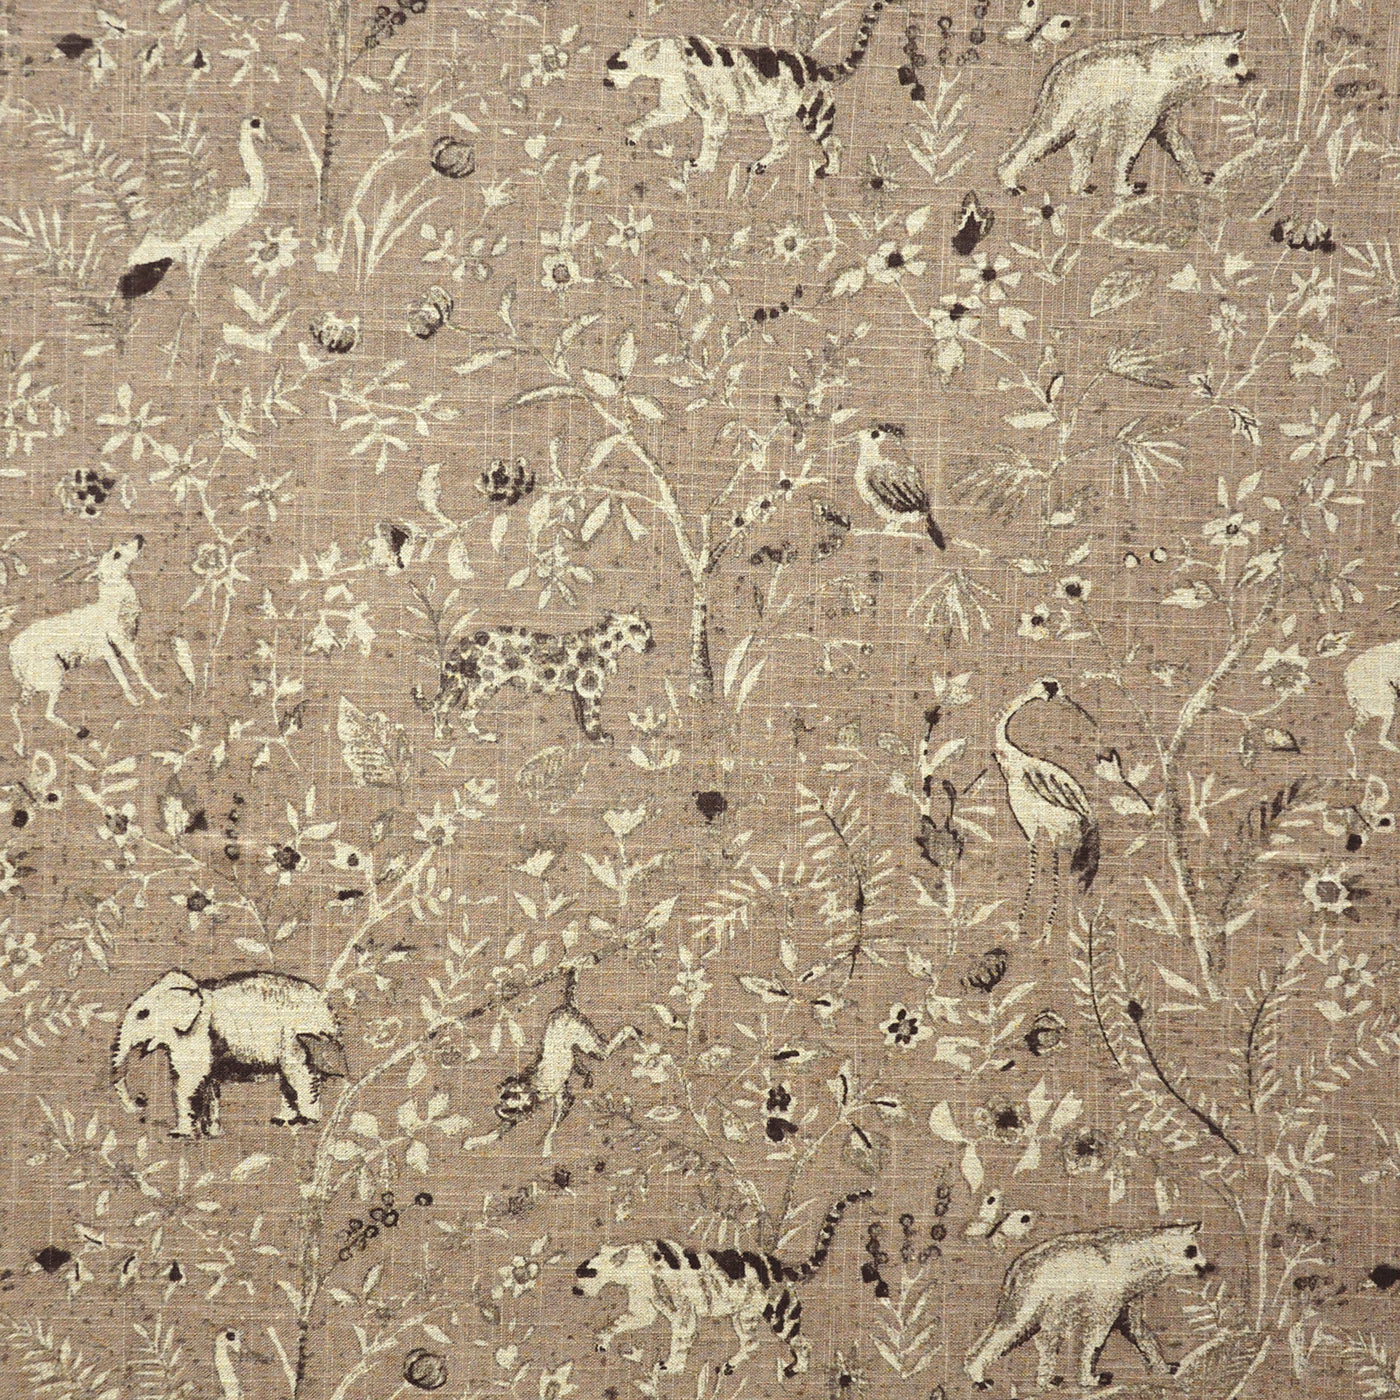 Purchase Maxwell Fabric - Tiergarten, # 217 Mouse